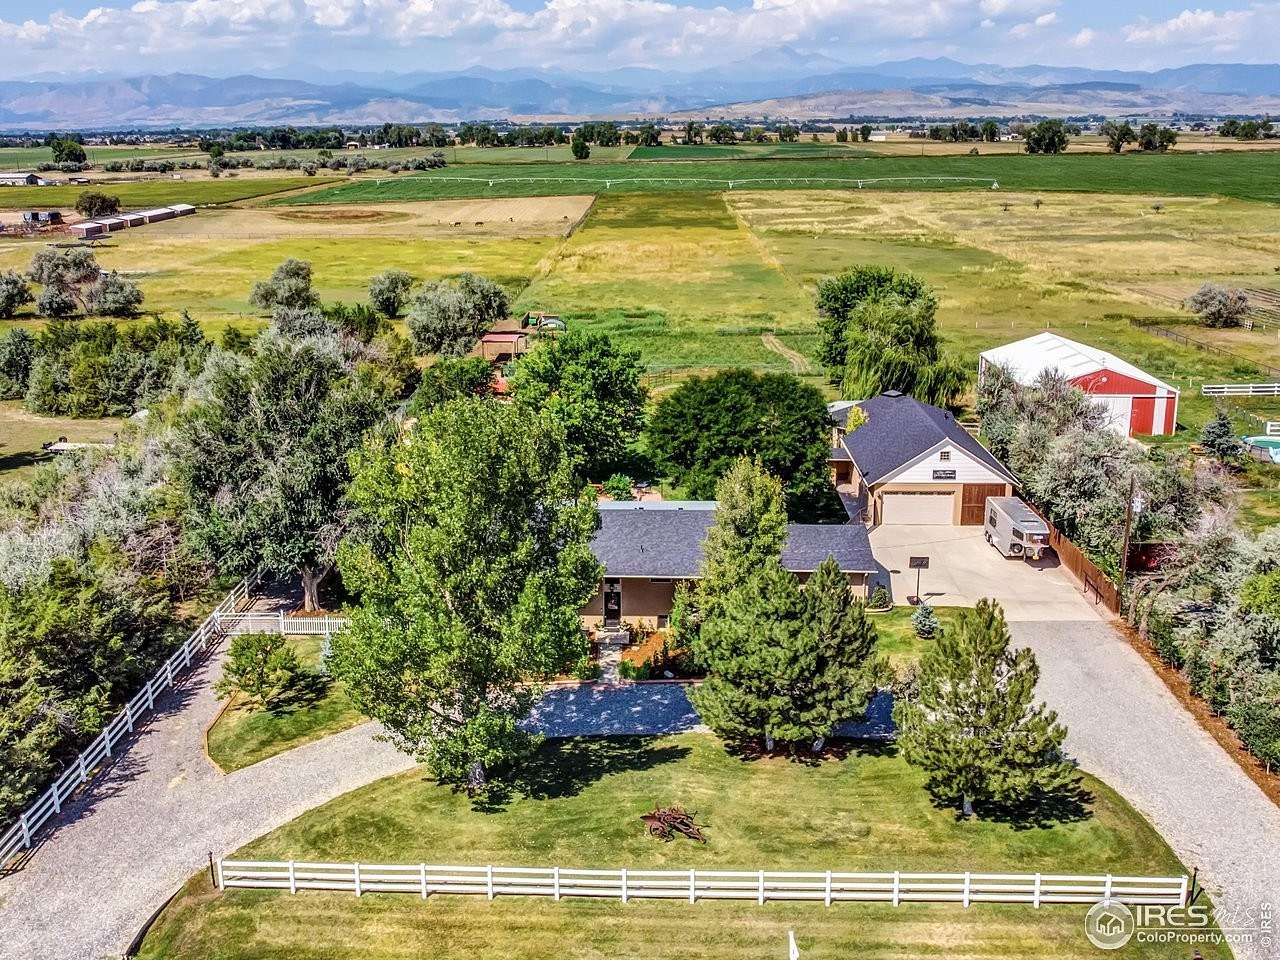 6.2 Acres of Land with Home for Sale in Longmont, Colorado